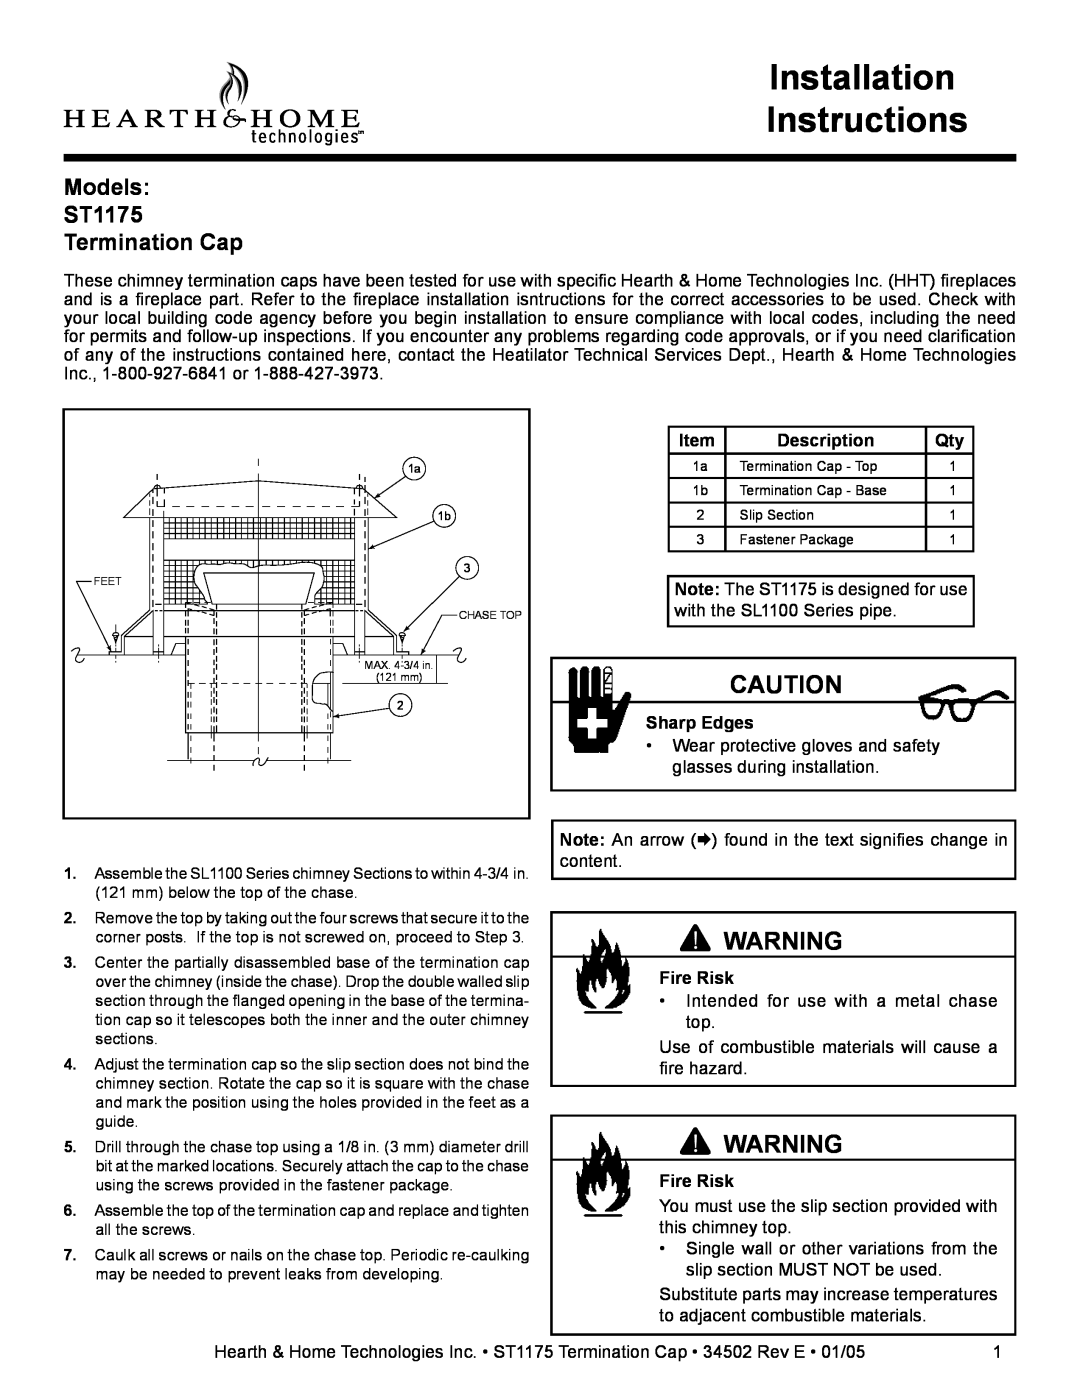 Hearth and Home Technologies installation instructions Installation Instructions, Models ST1175 Termination Cap 